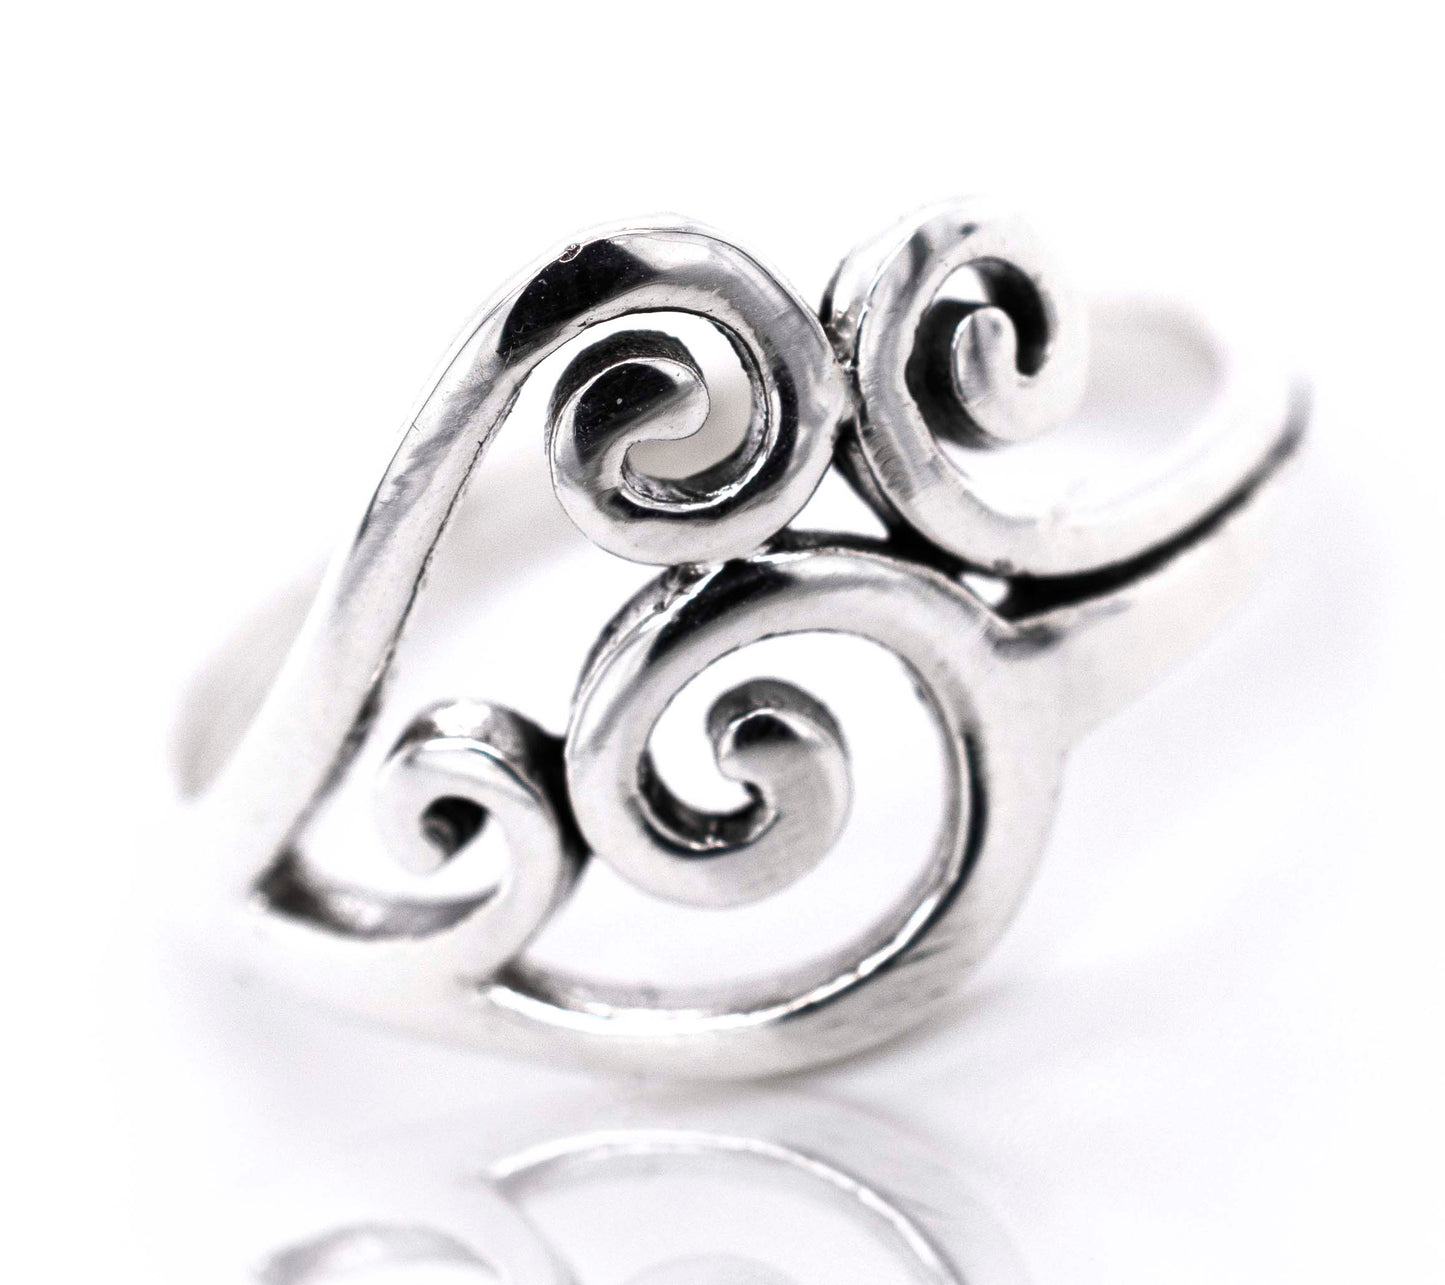 A Simple Swirl Design Ring with a spiral design, perfect for everyday wear, from Super Silver.